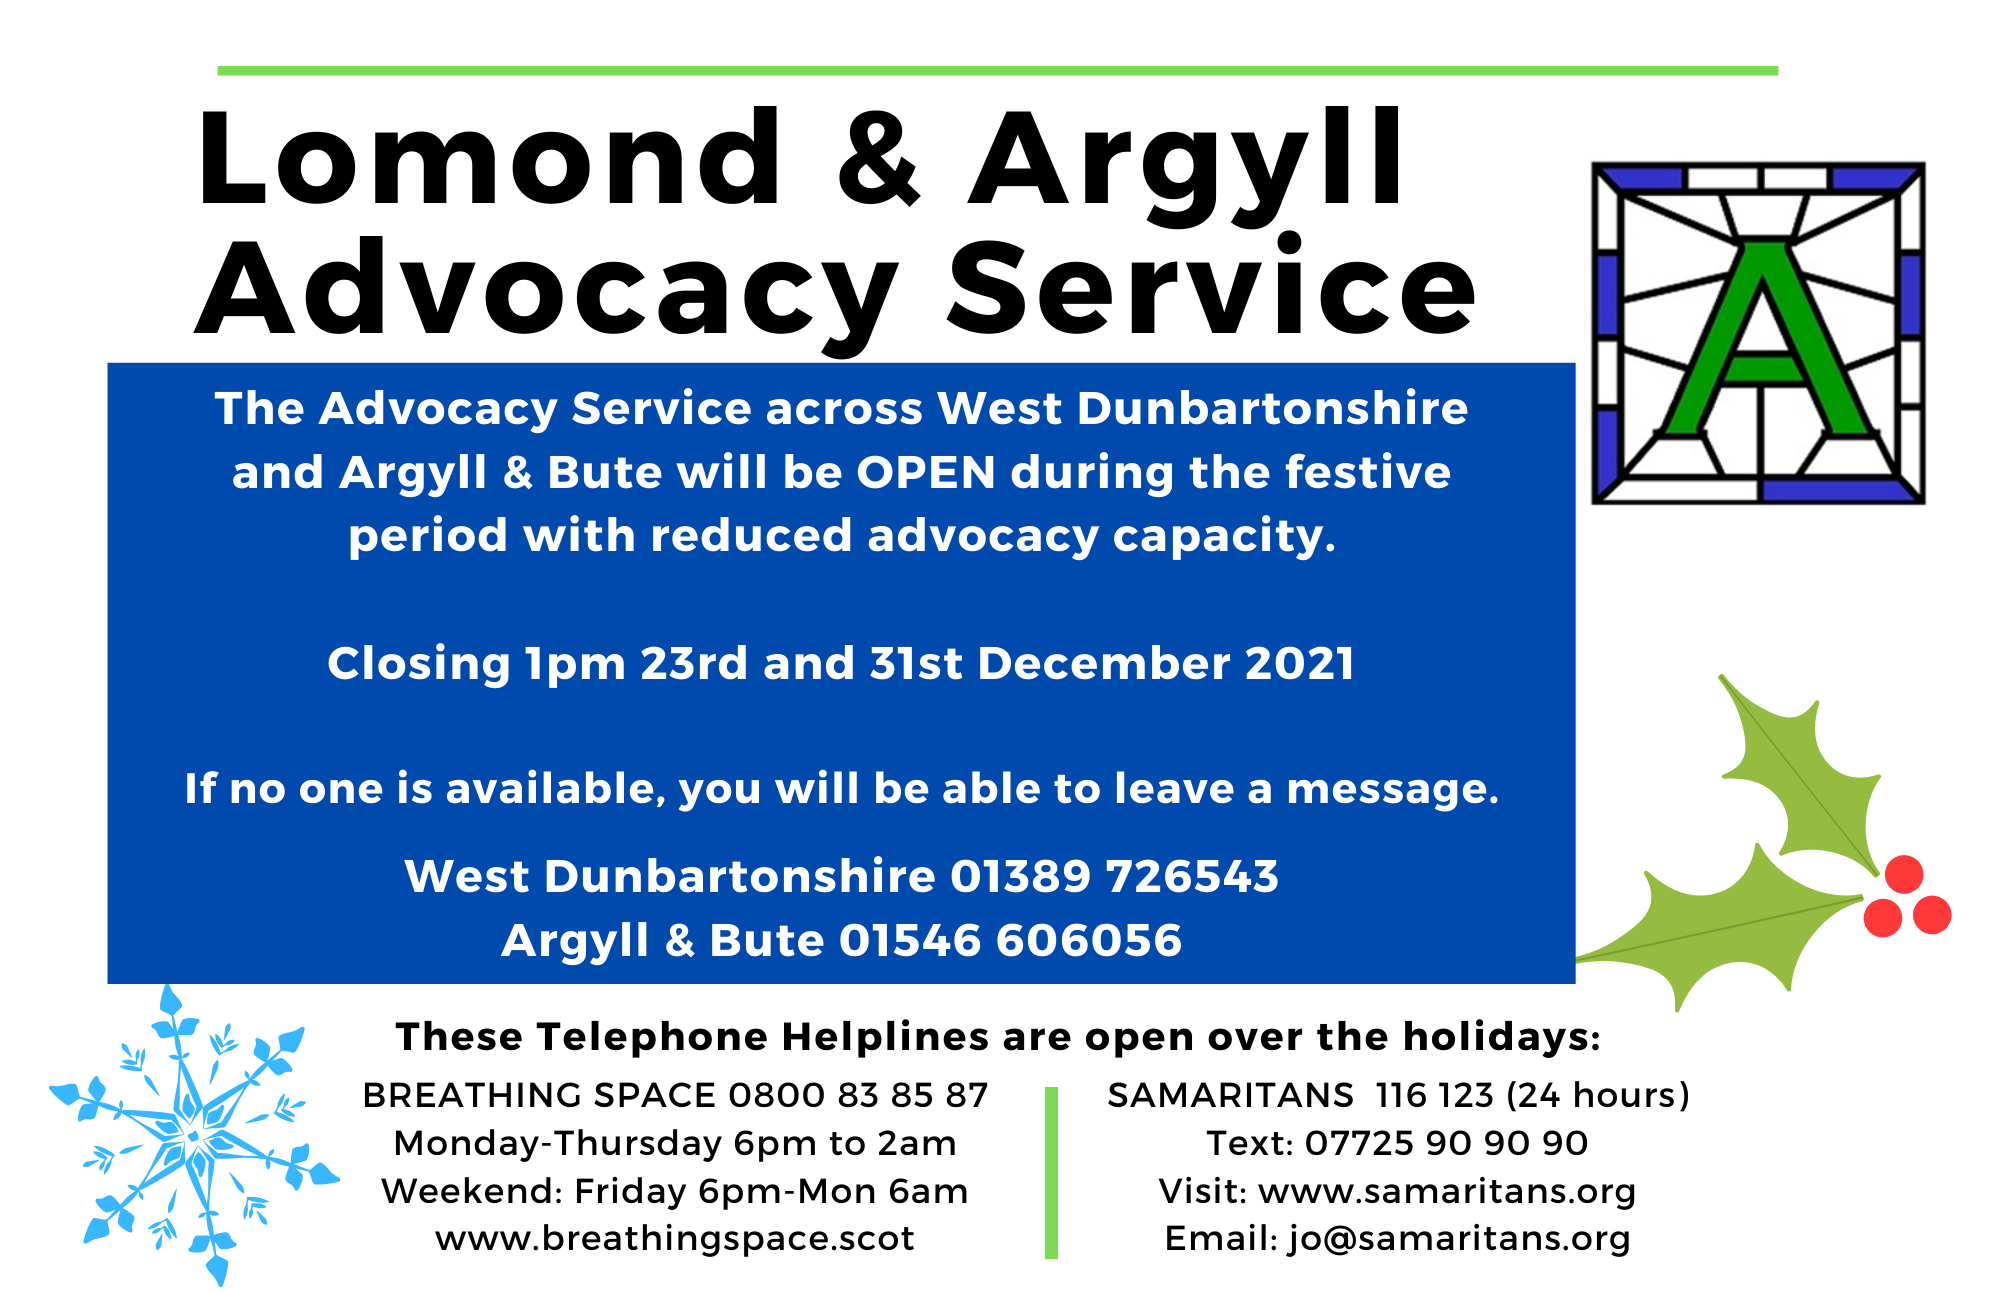 details of Christmas Opening hours across LAAS - West Dunbartonshire and Argyll and Bute. Details are repeated in the body of the post.